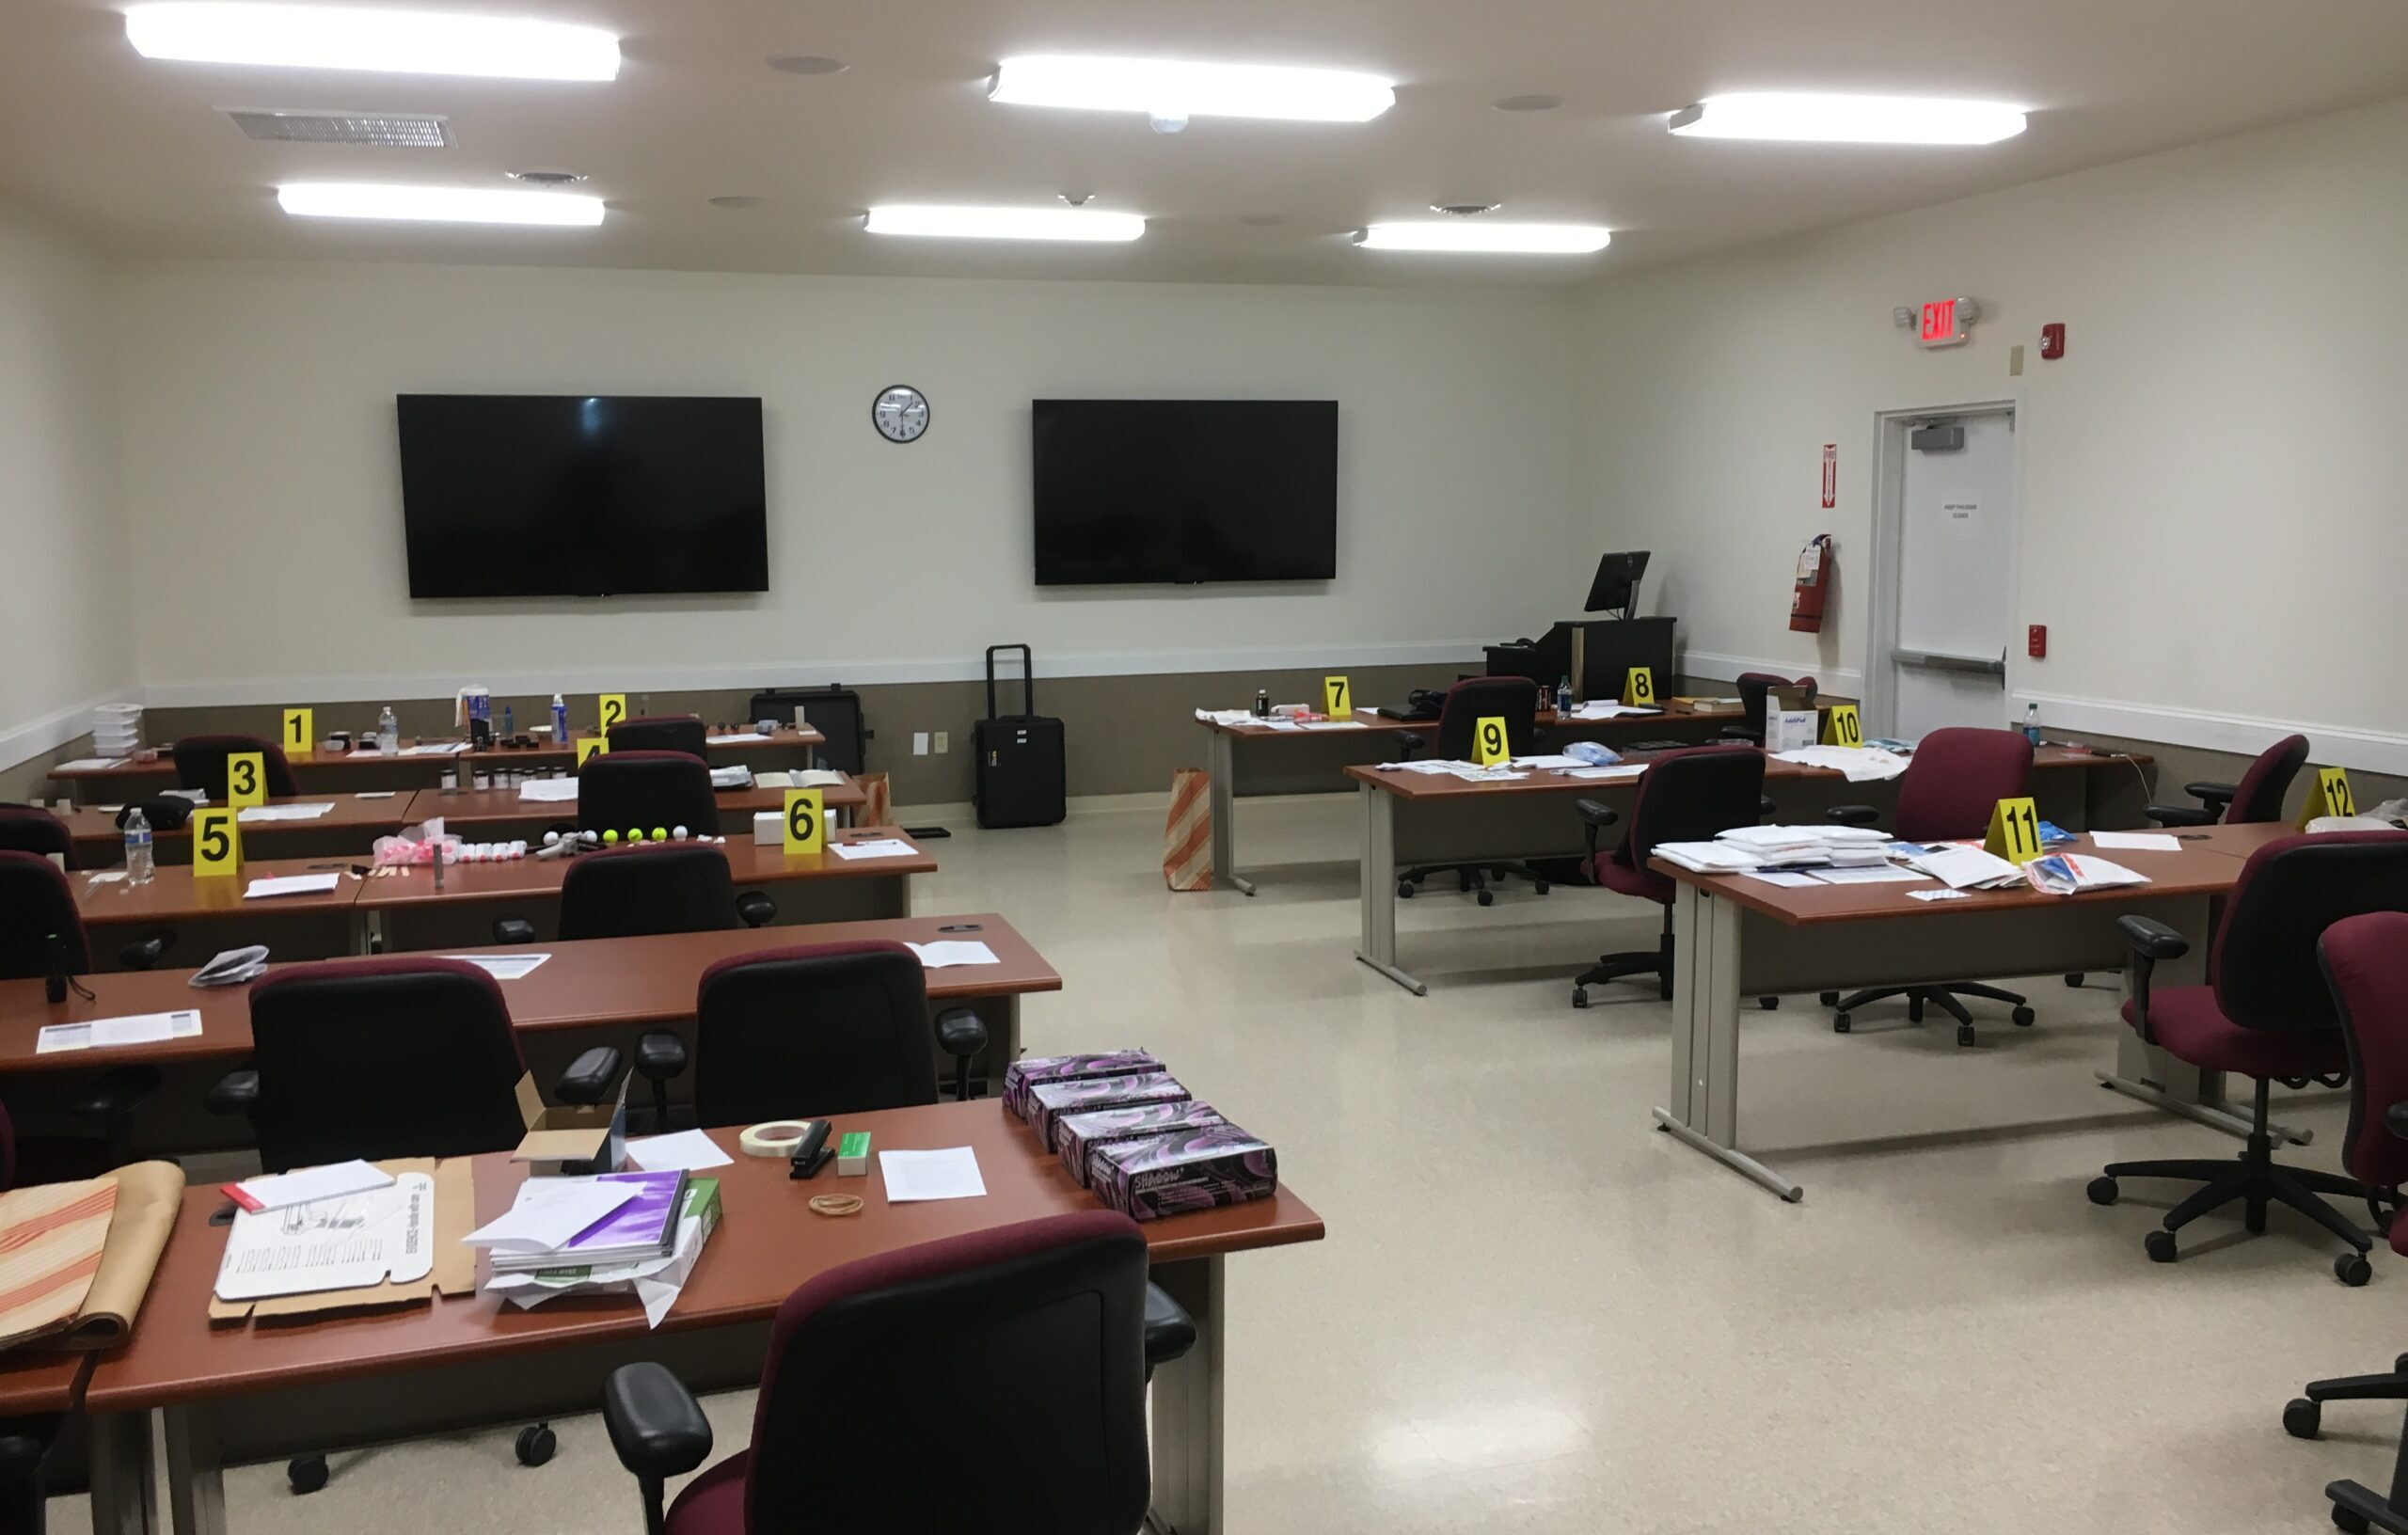 OSI agents are students and instructors at crime scene investigation classes throughout the US. Pictured is an OSI-led forensics classroom at the DS training facility.